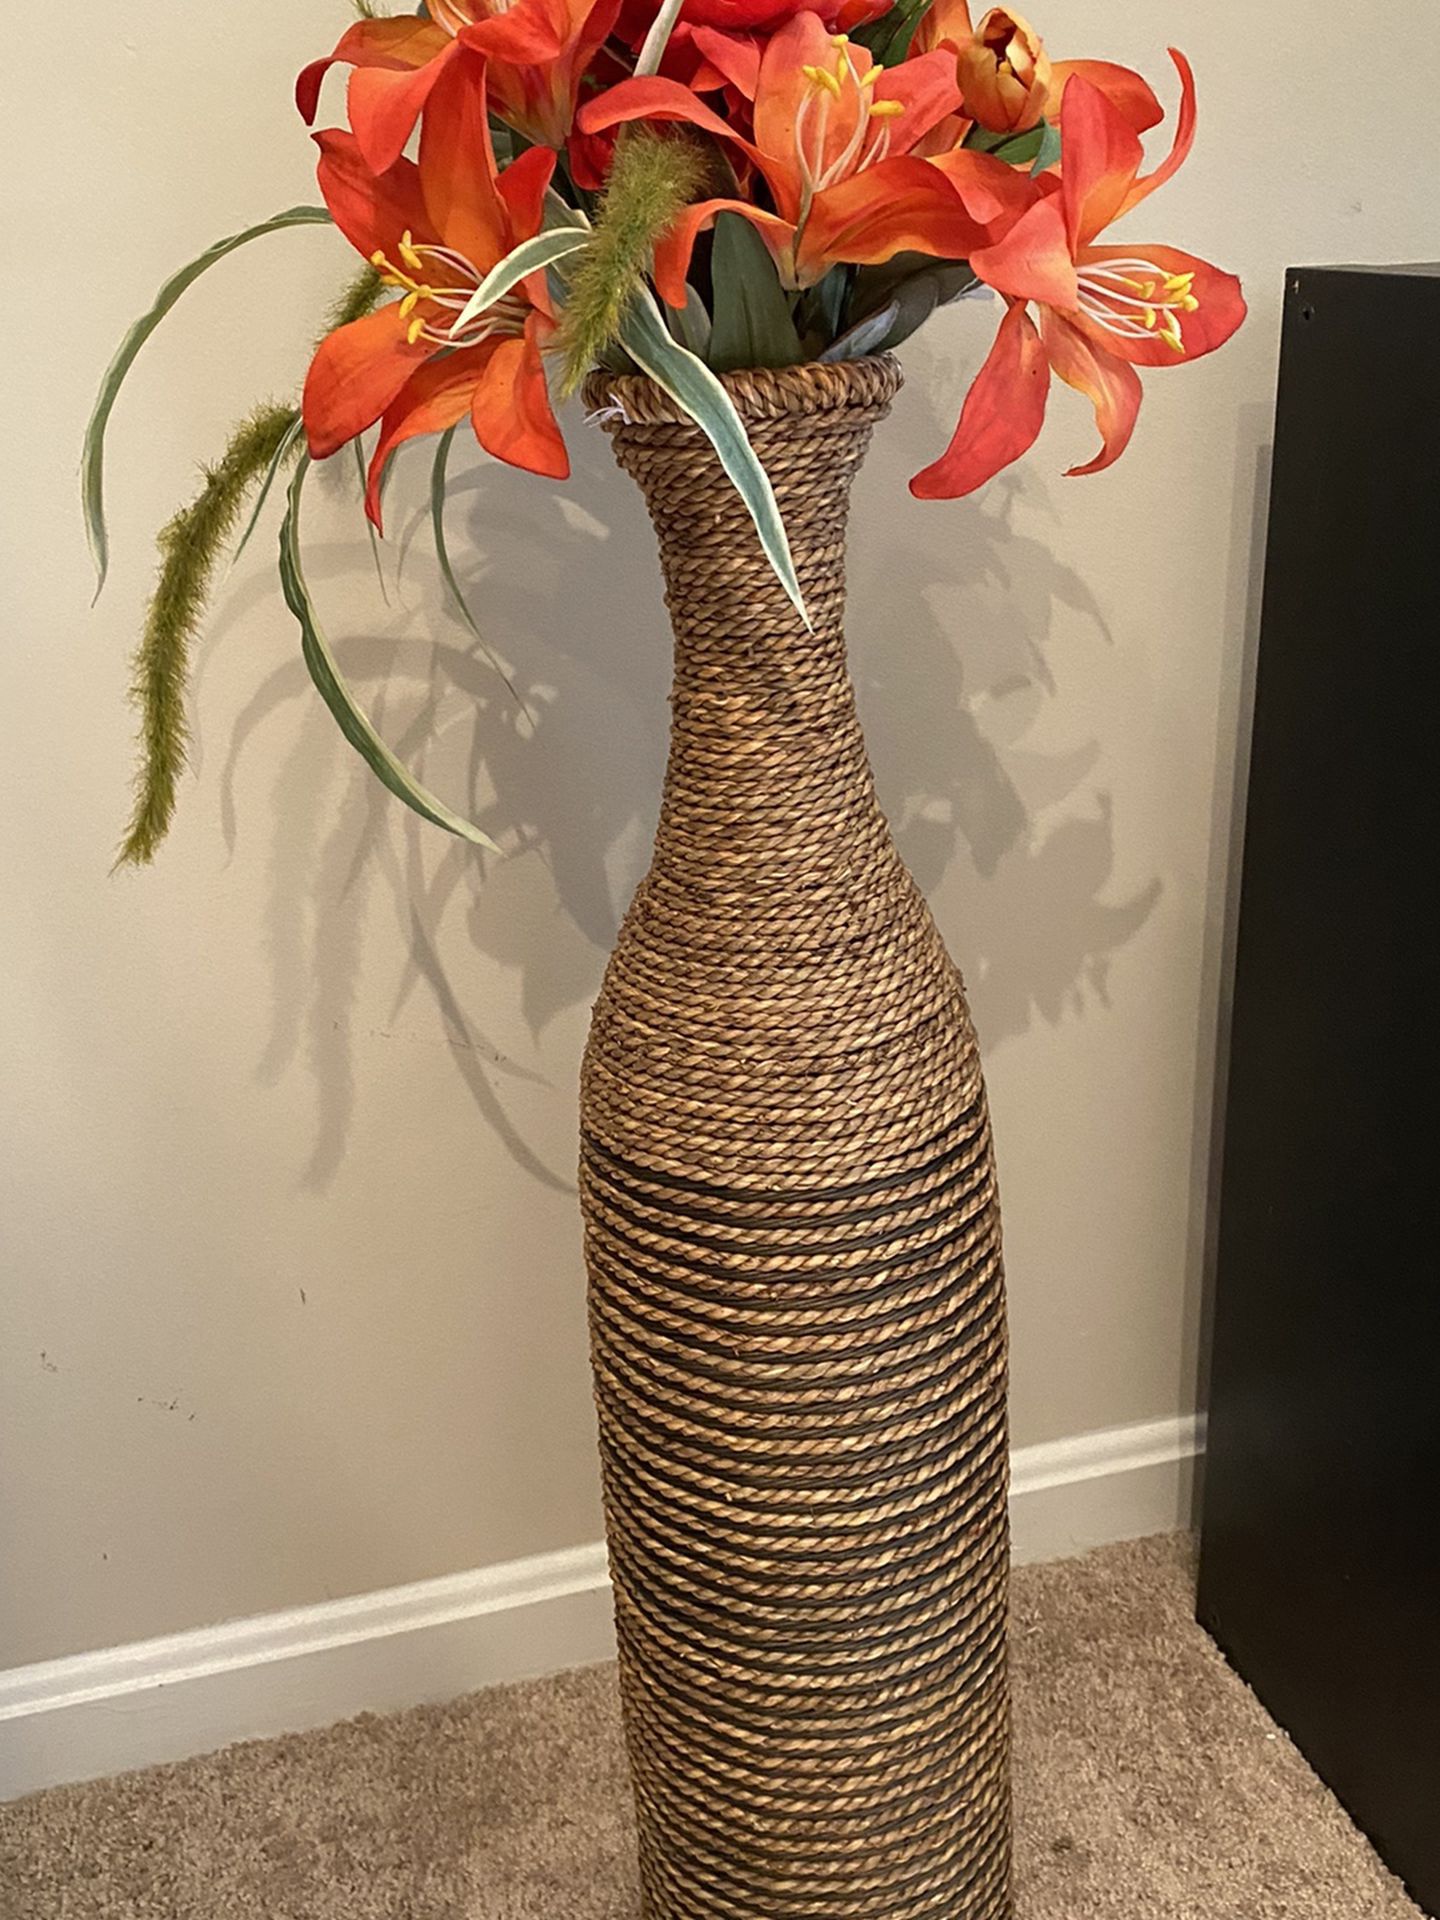 MOVING OUT SALE!!! Tall Flower Vase